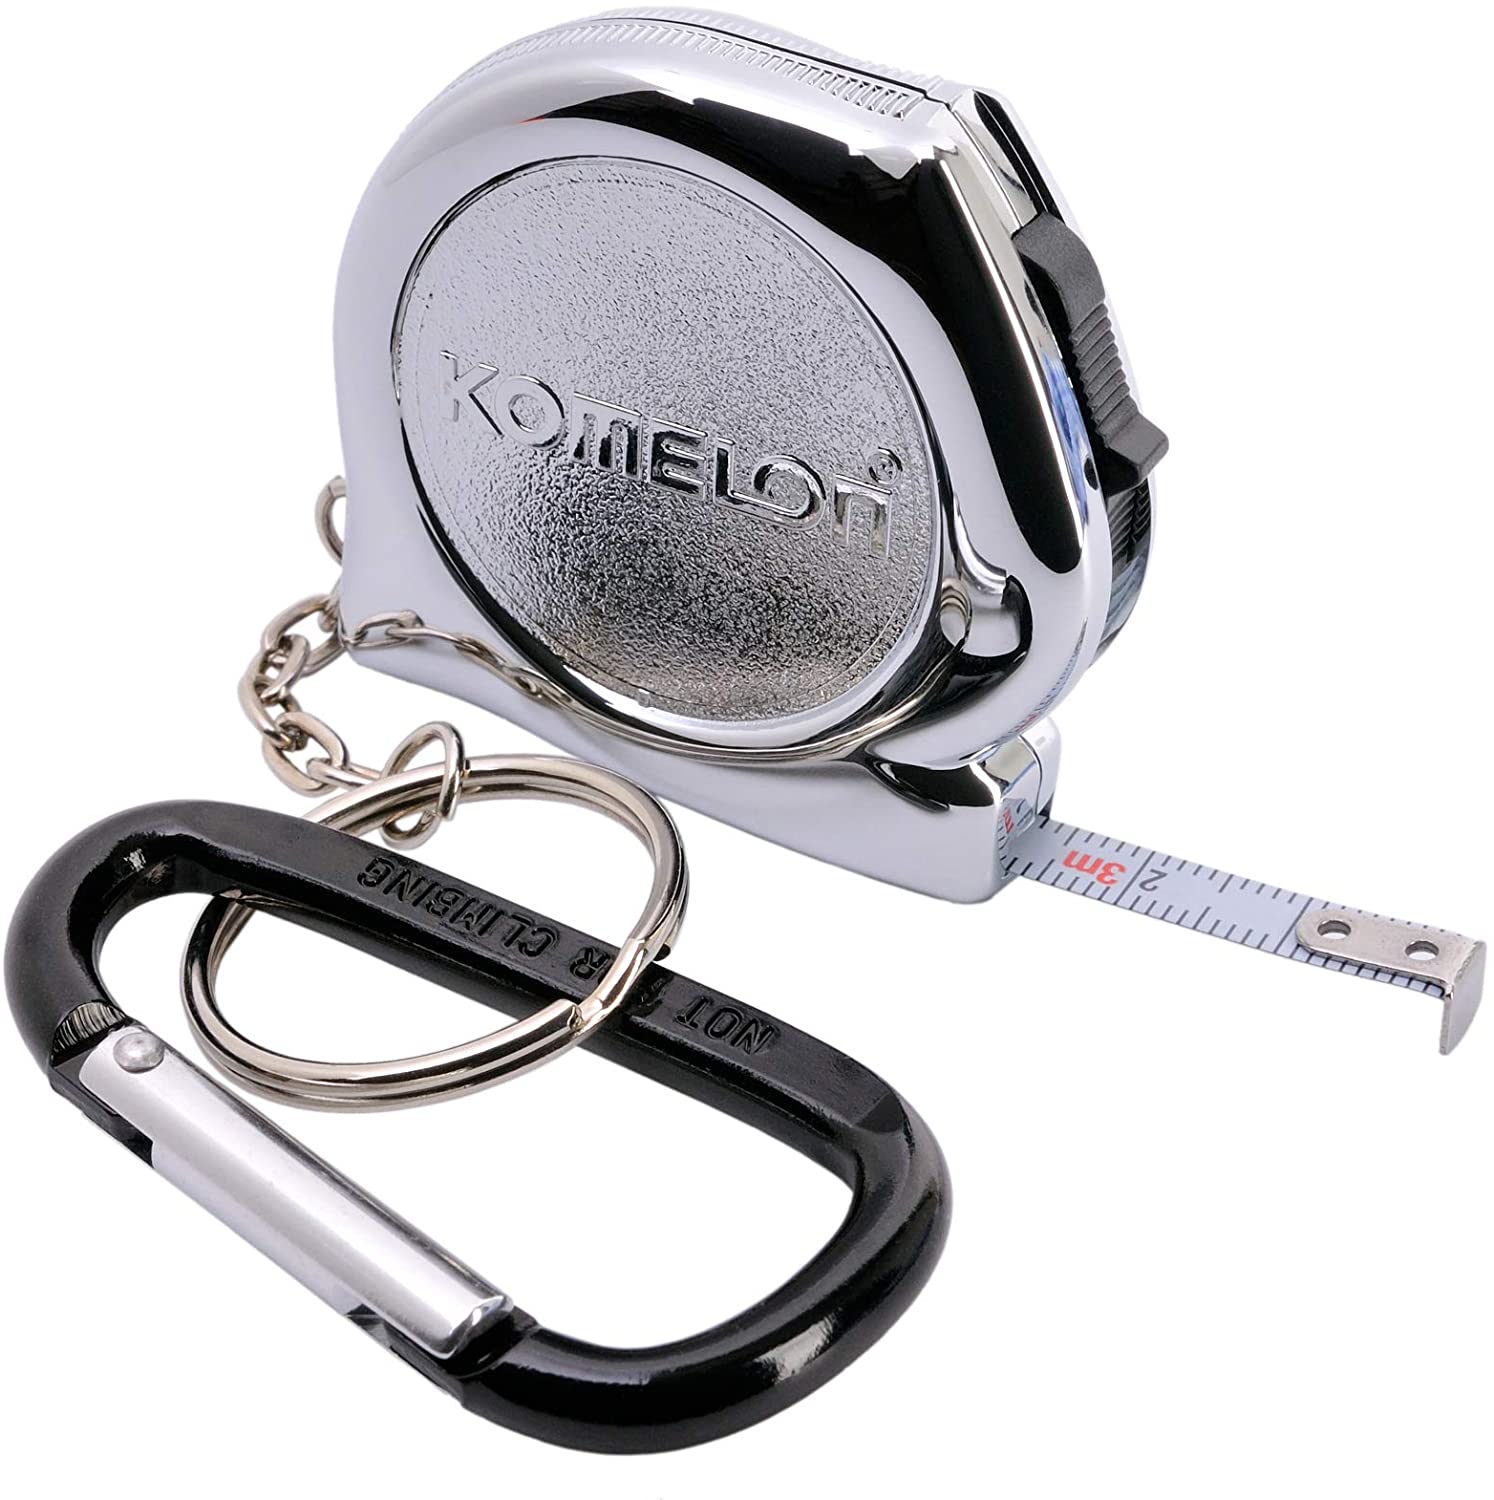 Komelon, KOMELON KMC-74K Pro Easy Chrome Case Tape Measure 3m x 6mm Metric Rulers Key Chain Key-Ring with Carabiner Clip Accessory